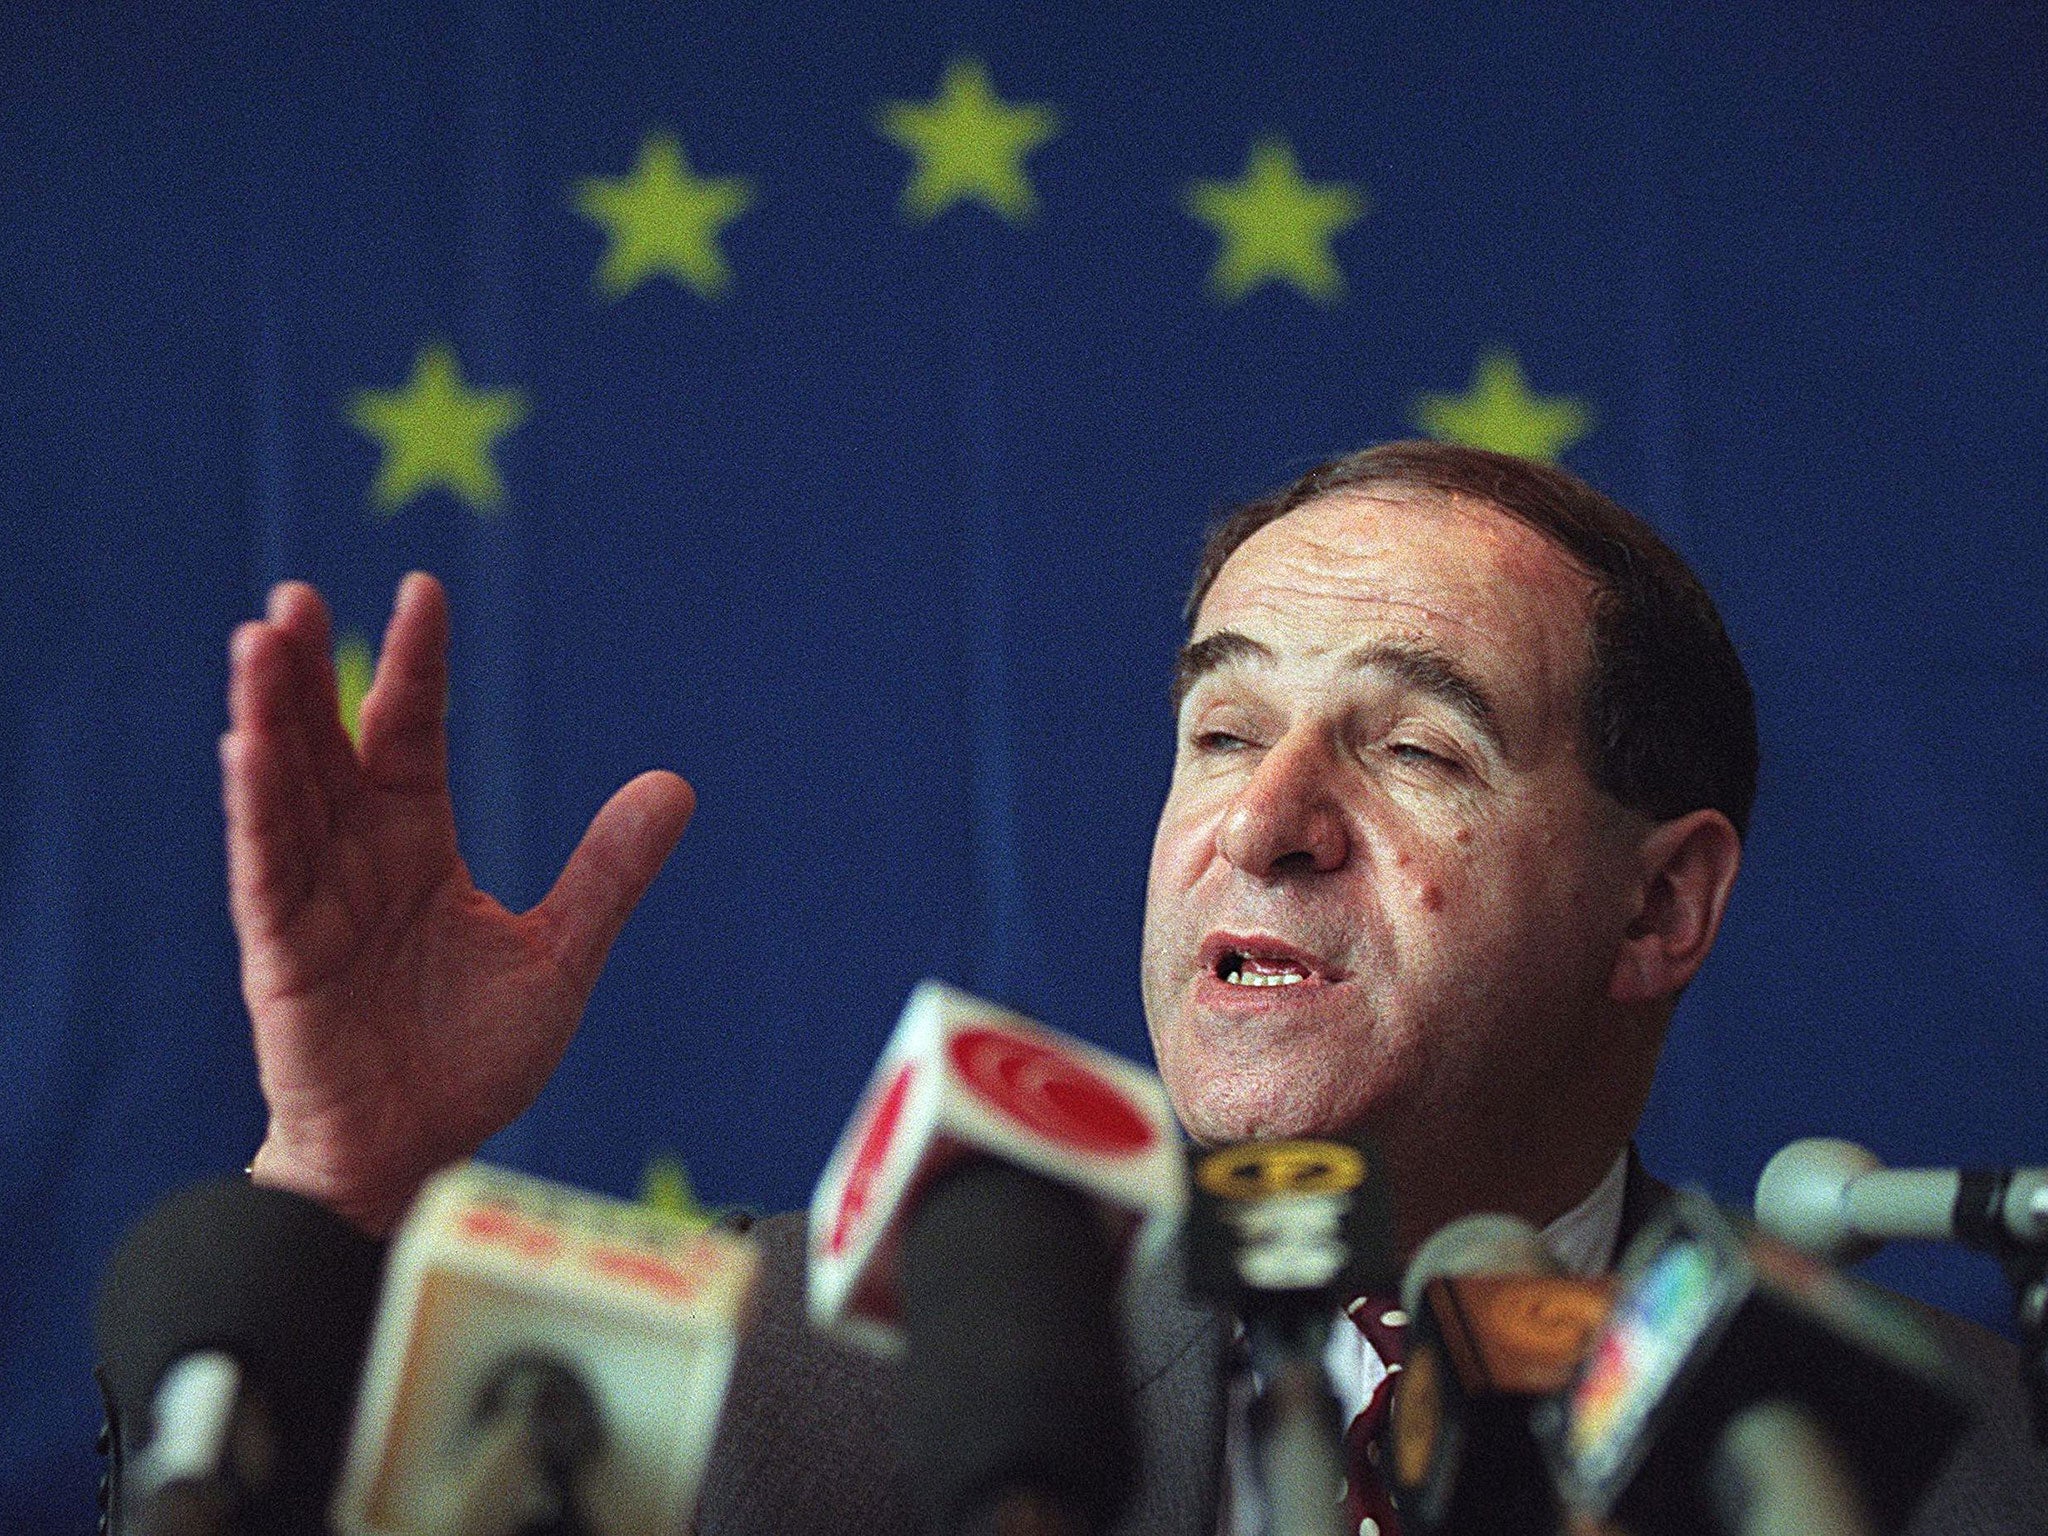 Friends of Lord Brittan, who died in January, said his final months had been clouded by a ‘smear campaign’